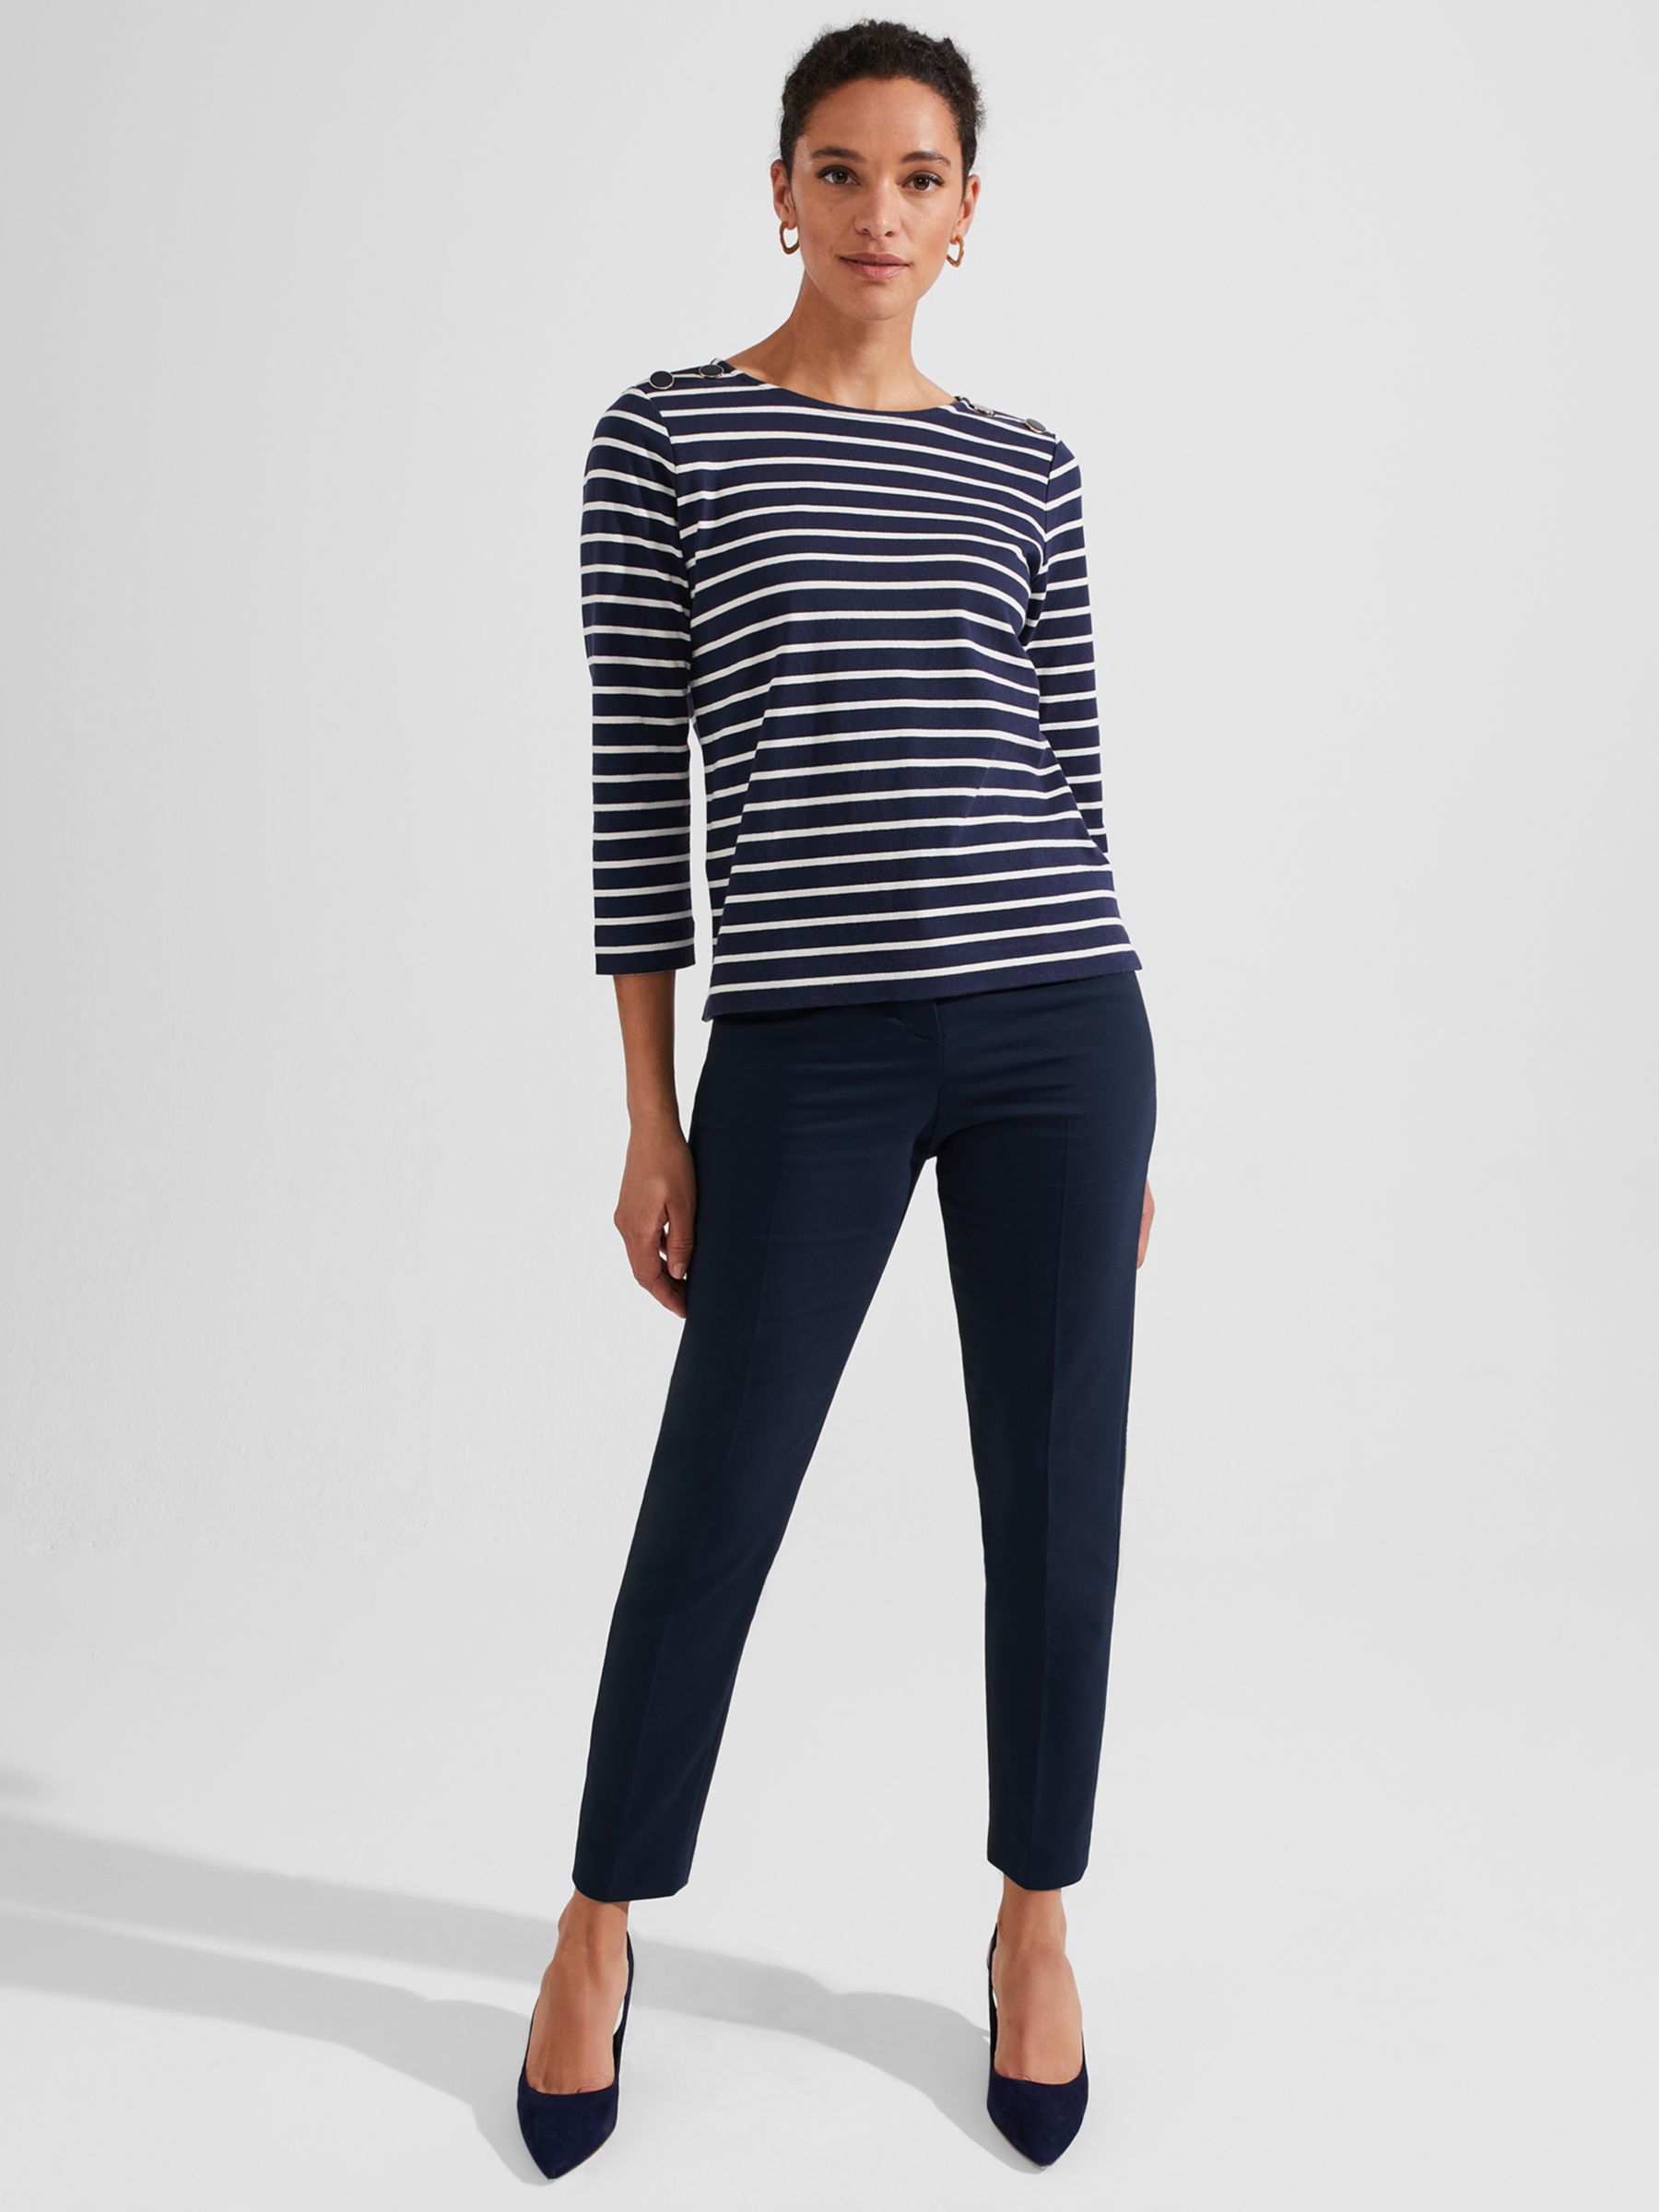 Hobbs Quin Cotton Blend Trousers, Navy at John Lewis & Partners